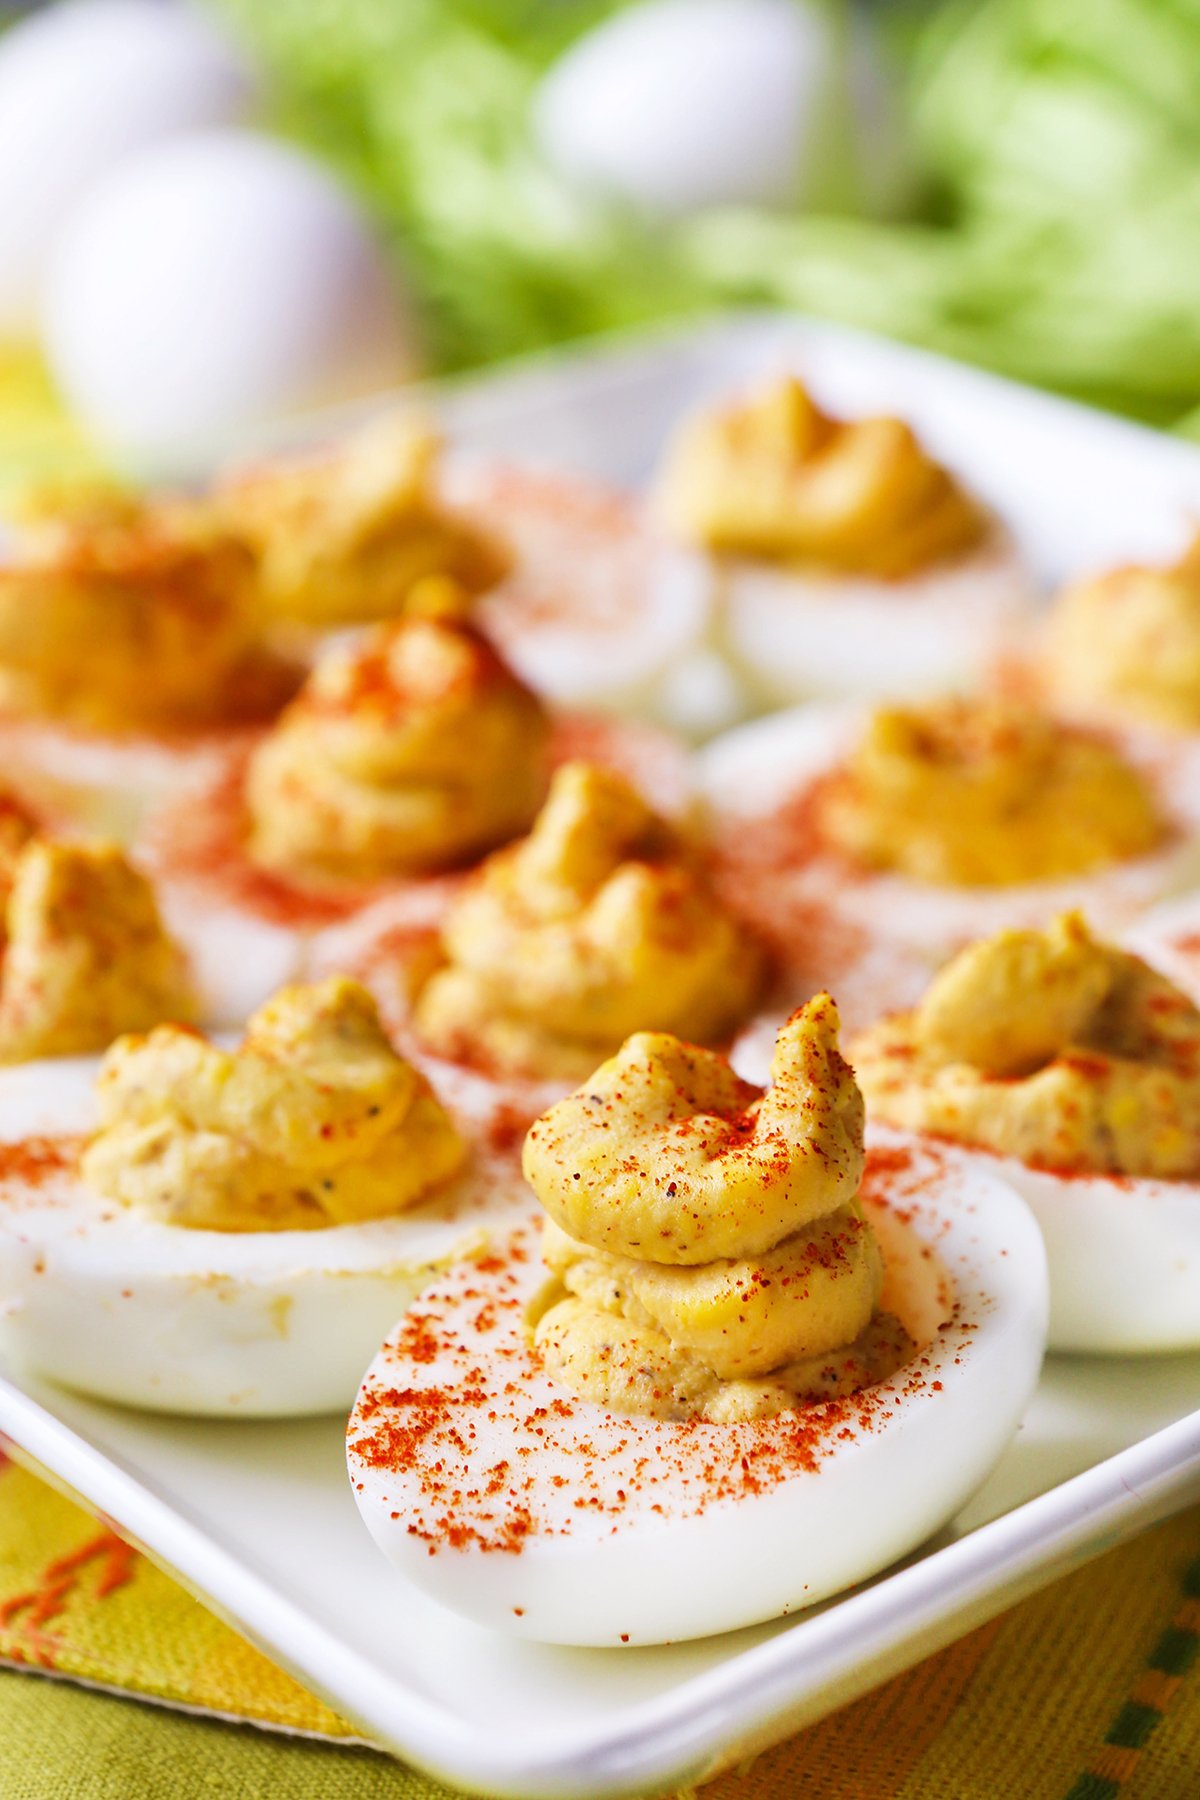 Deviled eggs lined up on a serving plate in a single row, with paprika sprinkled over the tops.